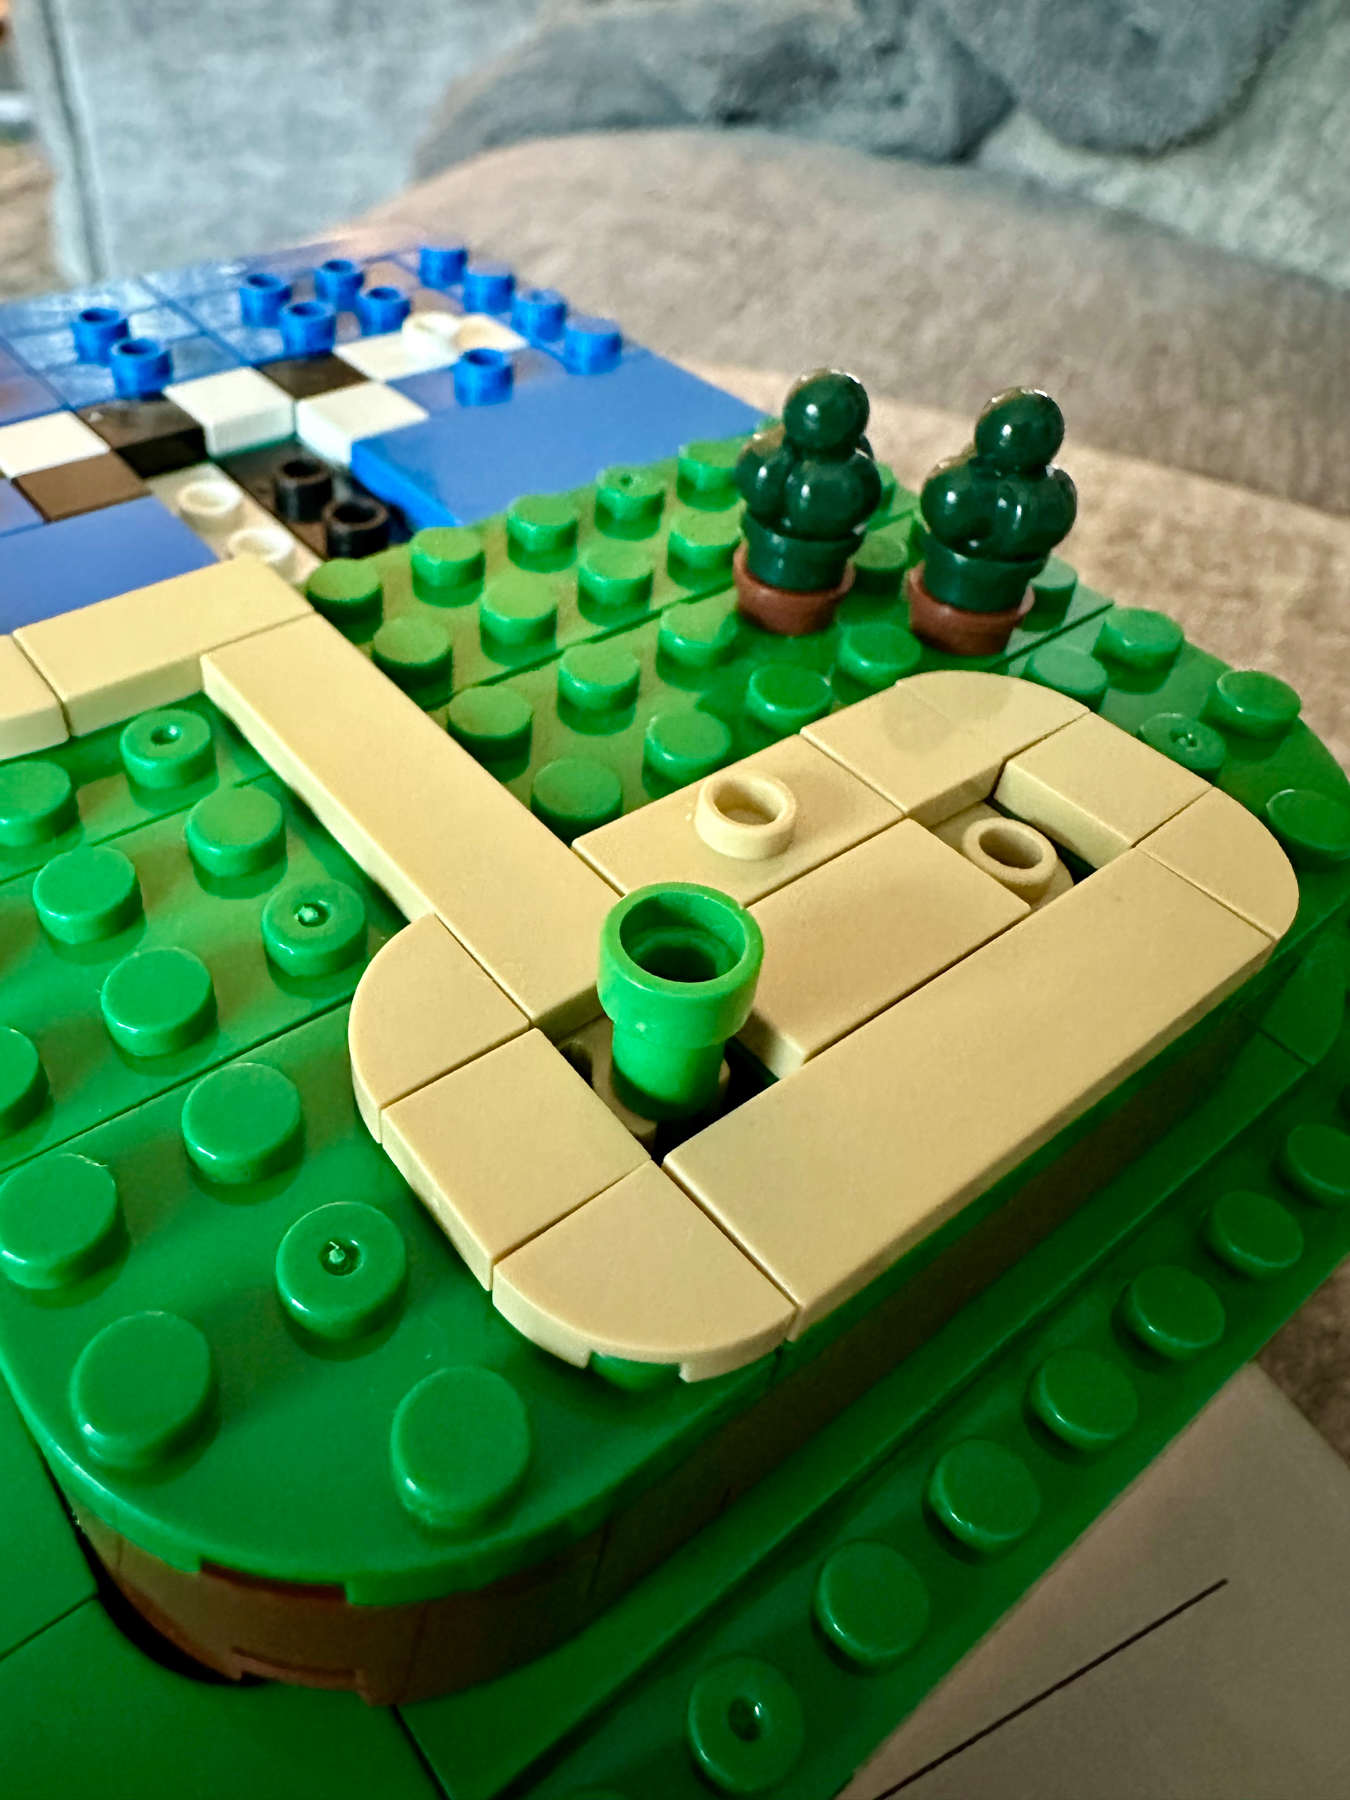 A close-up of a LEGO model featuring greenery, a beige pathway, and a blue and white water body. The focus is on the pathway and green LEGO plants.